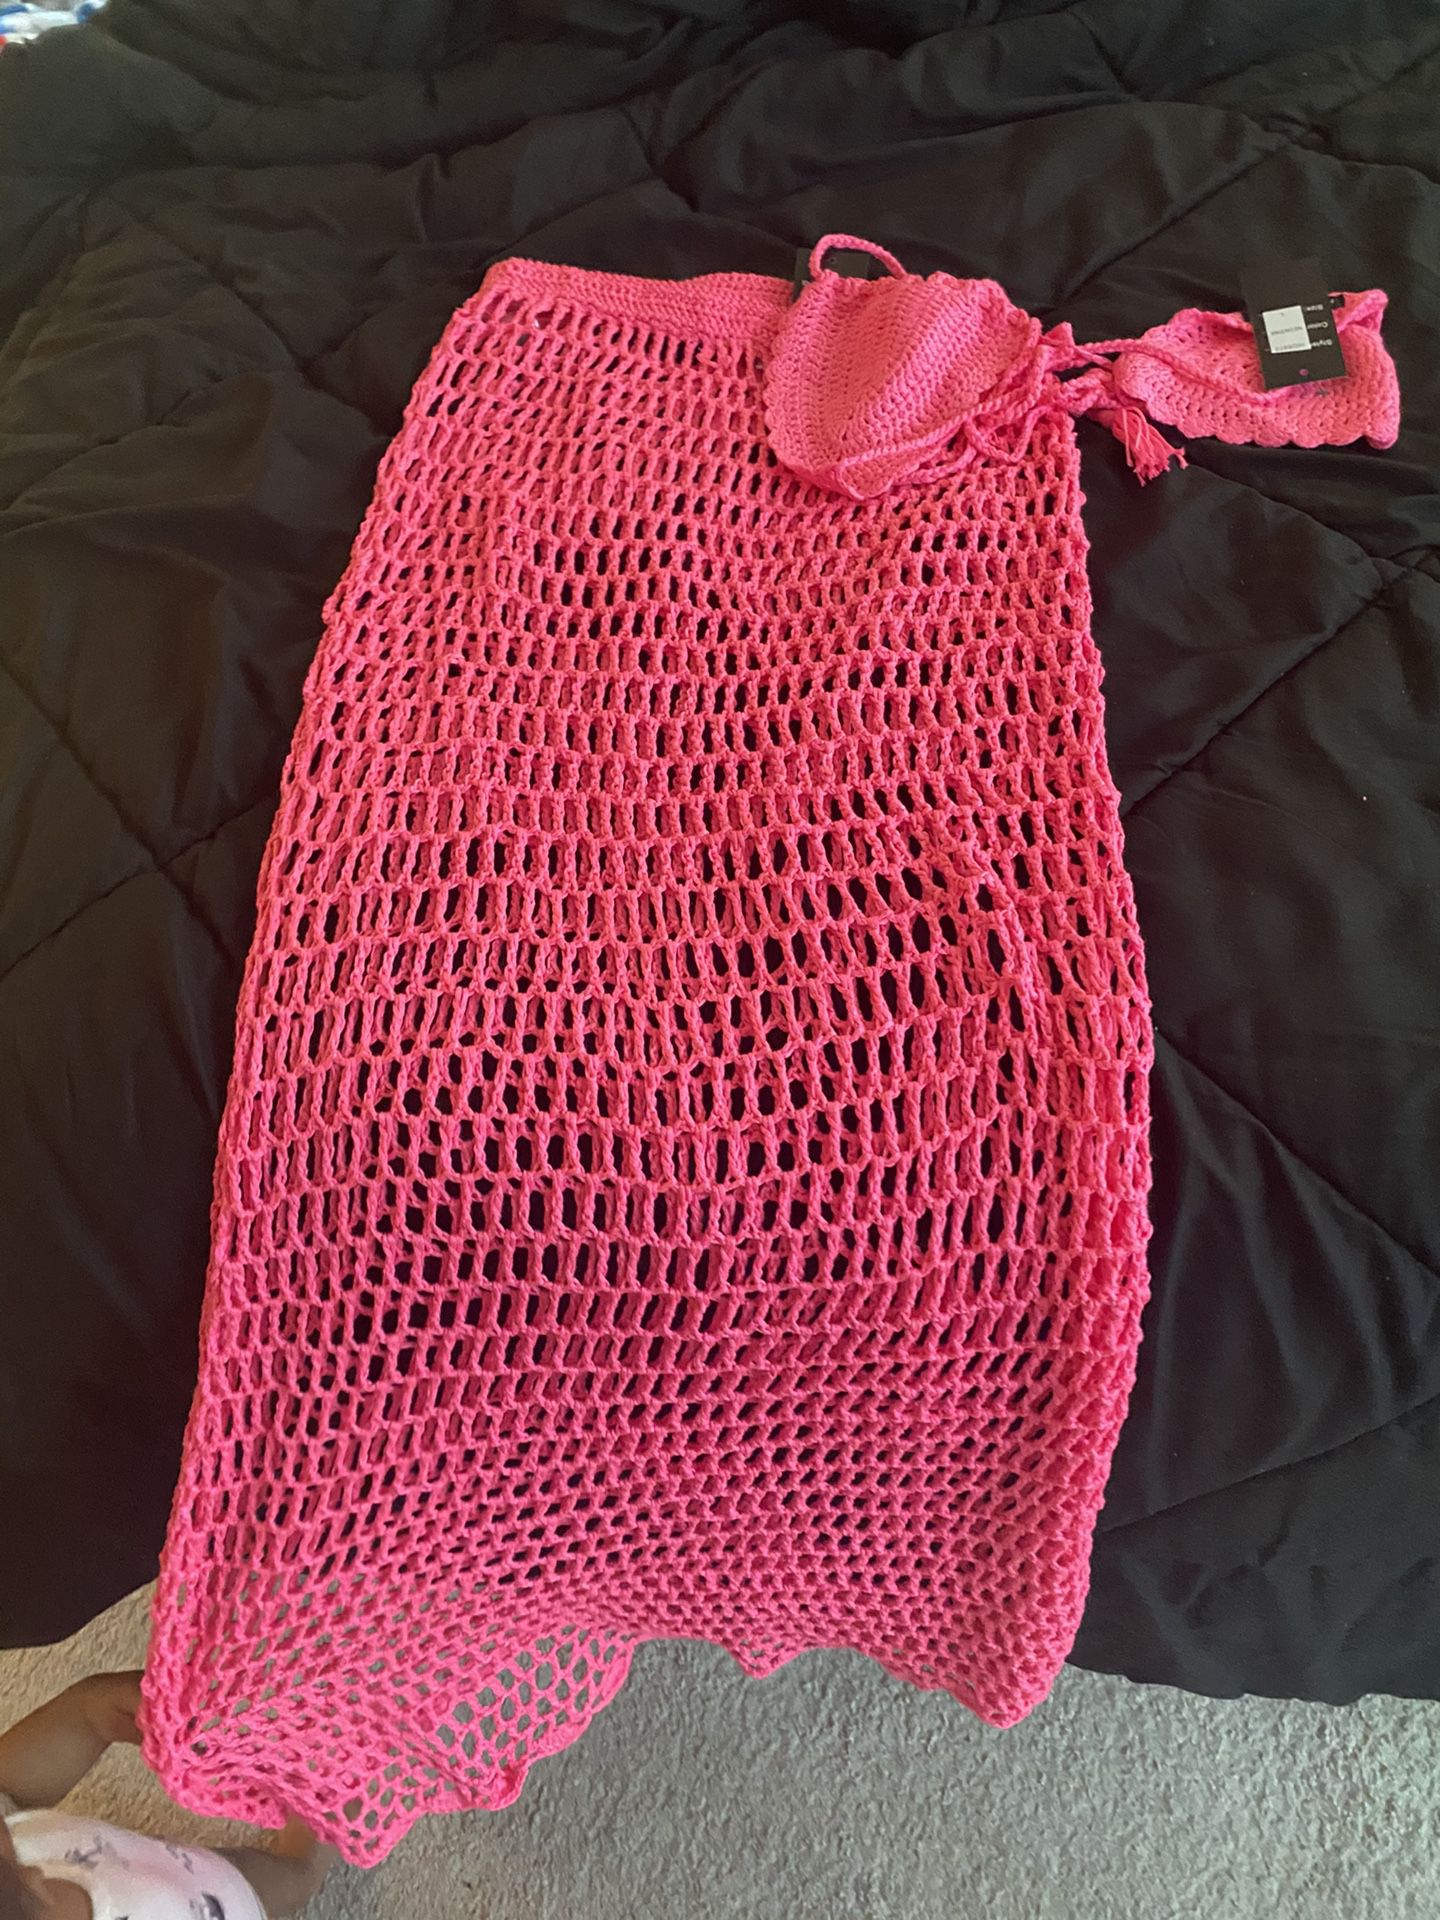 Fashion Nova Hot pink top and cover up skirt